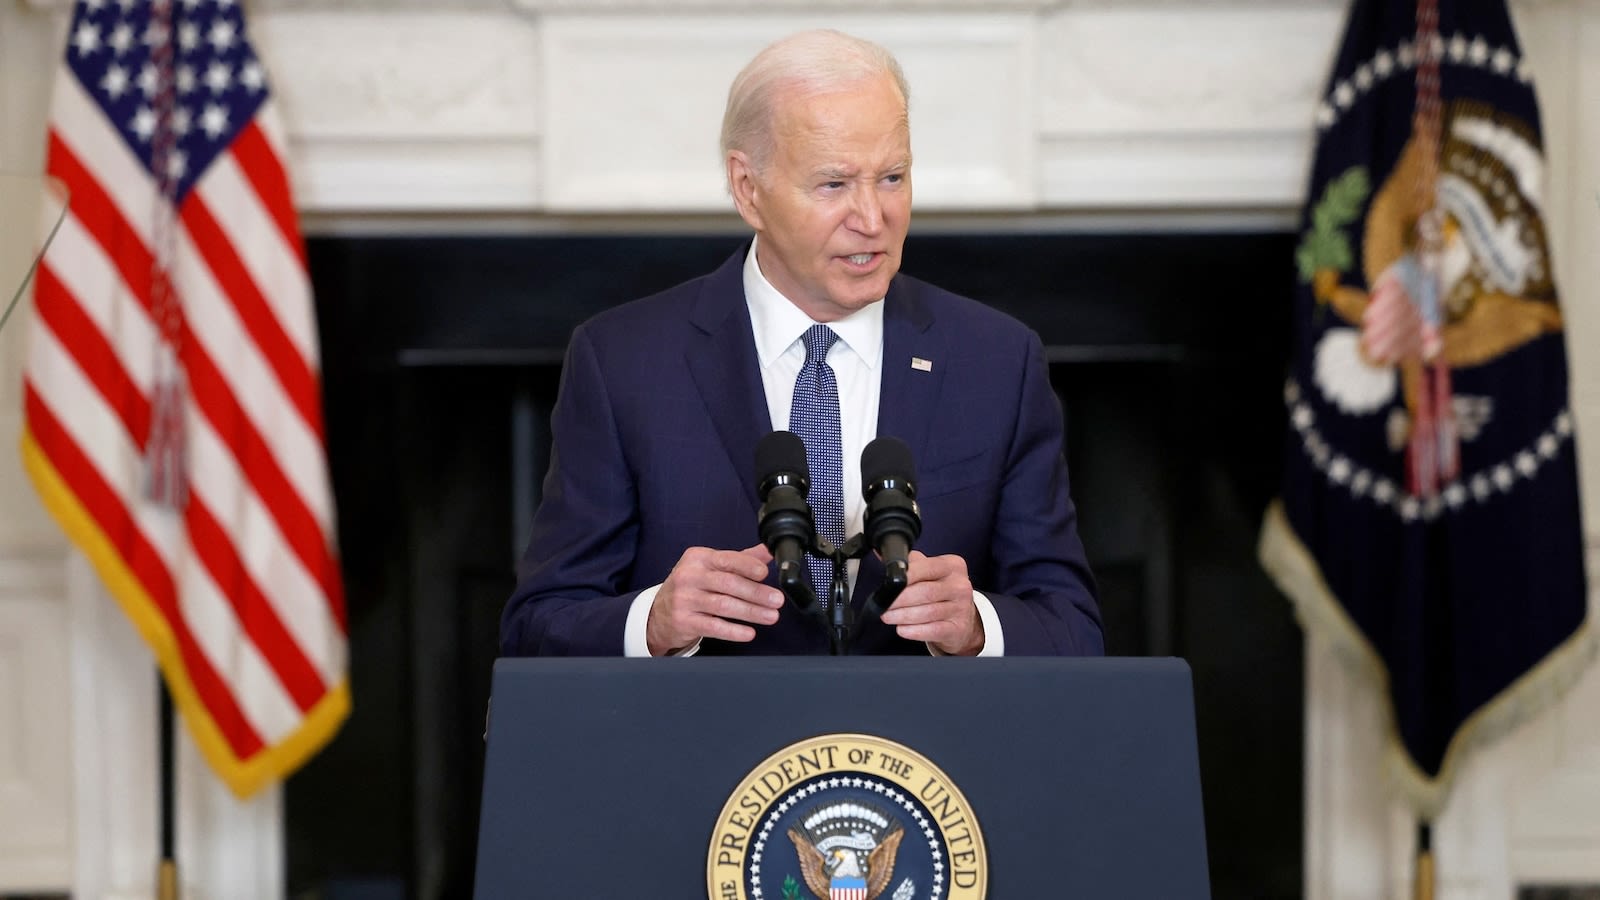 Biden reacts to Trump's conviction for the 1st time, calls attacks on judicial system 'reckless'